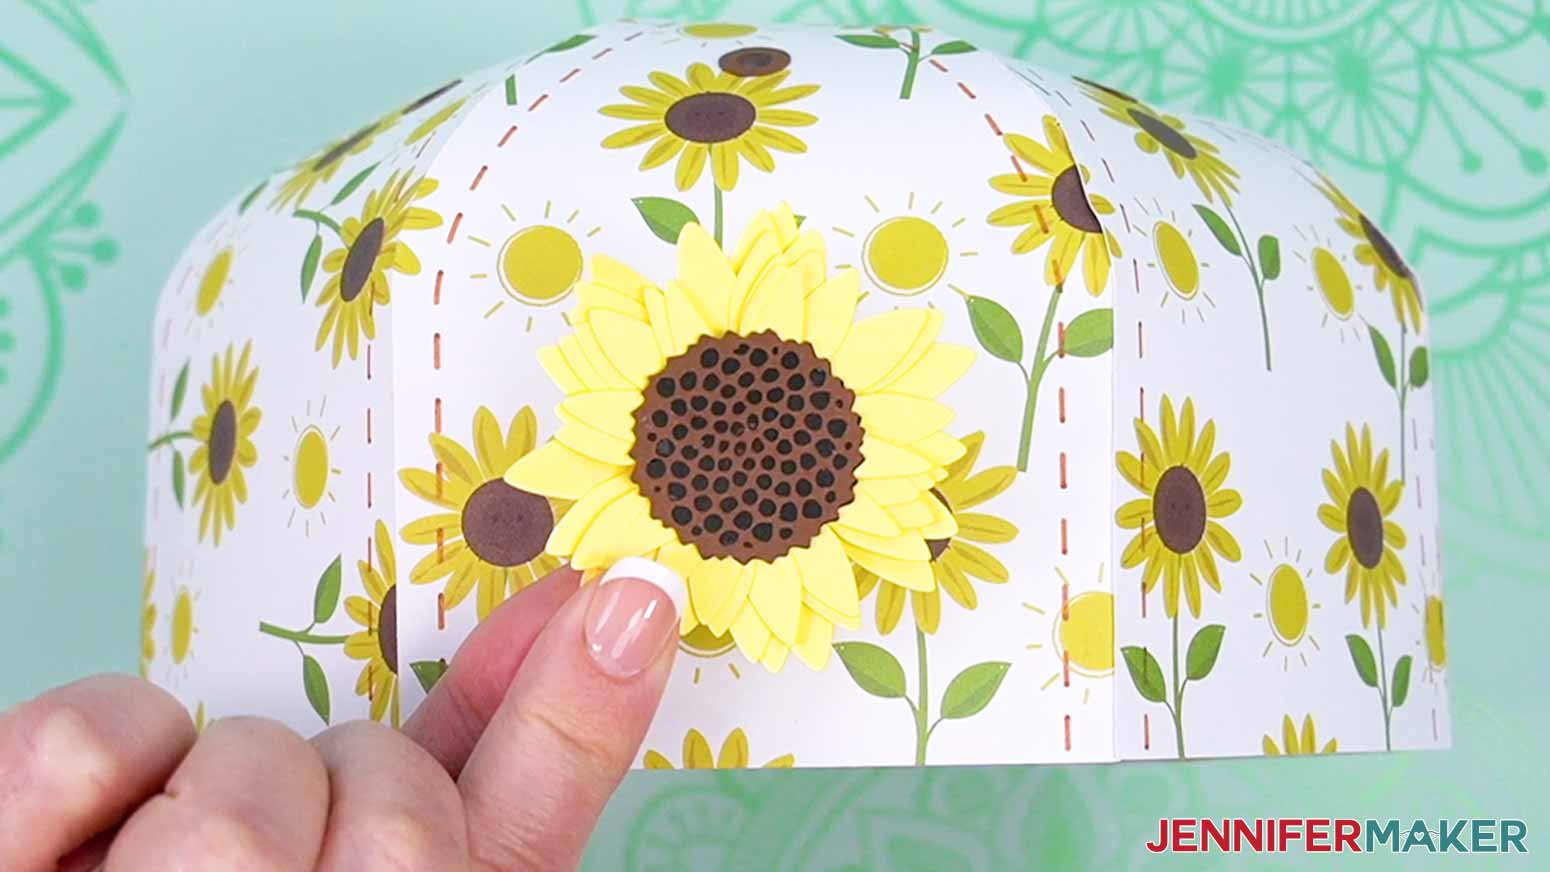 Add the detailed piece on top of the center of the sunflower.